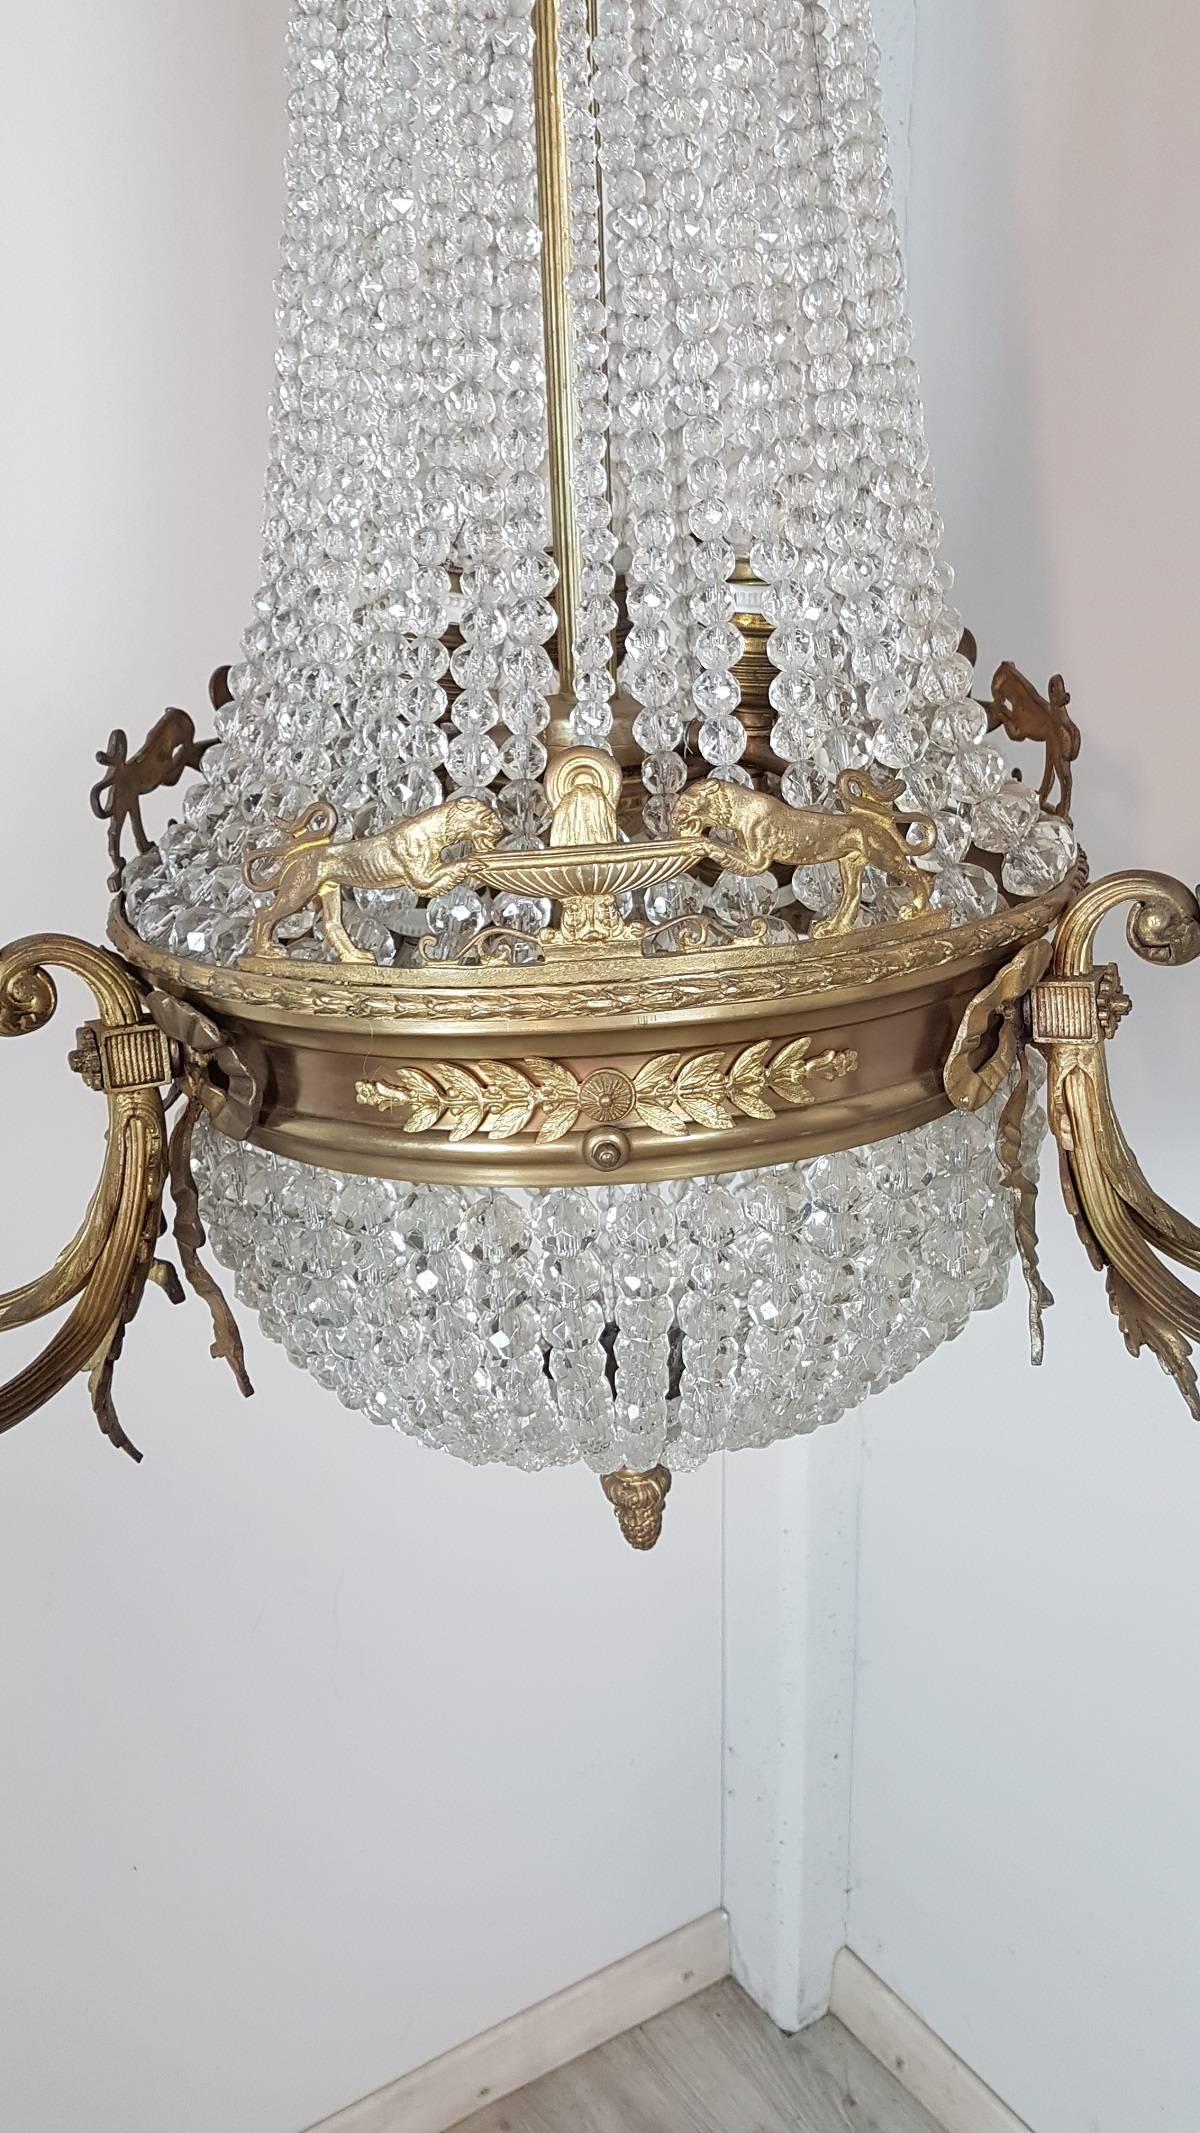 Beautiful and refined French Empire 19th century chandelier nine lights of which six on the outer circumference and three that internally illuminate the stem, called a hot-air balloon for its typical shape. In gilded bronze and completely covered